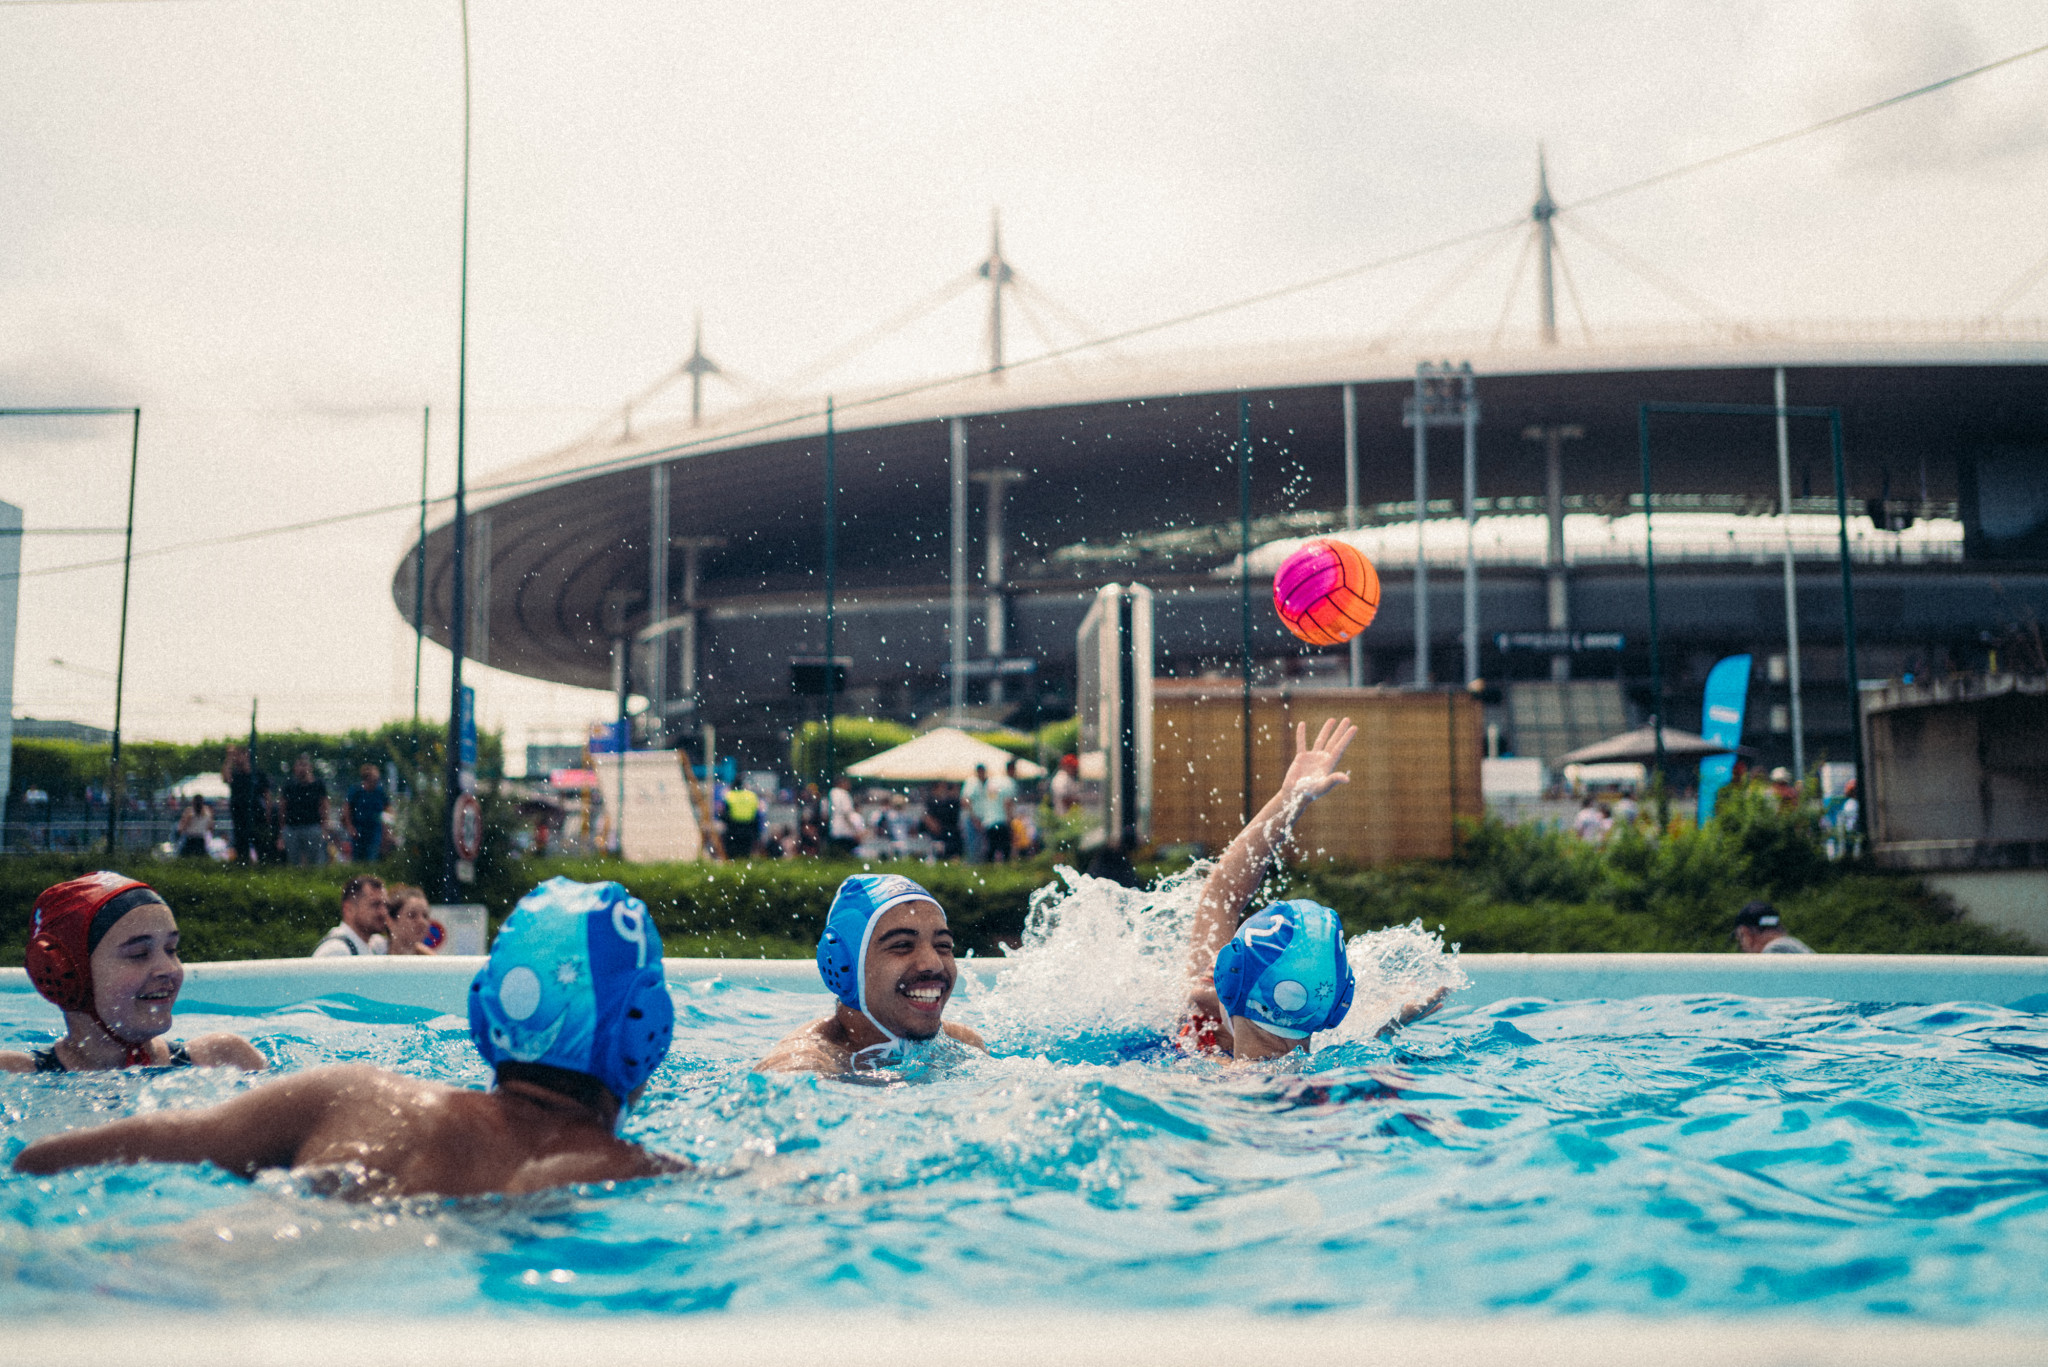 A mobile swimming pool was implemented for people to play water polo ©Paris 2024